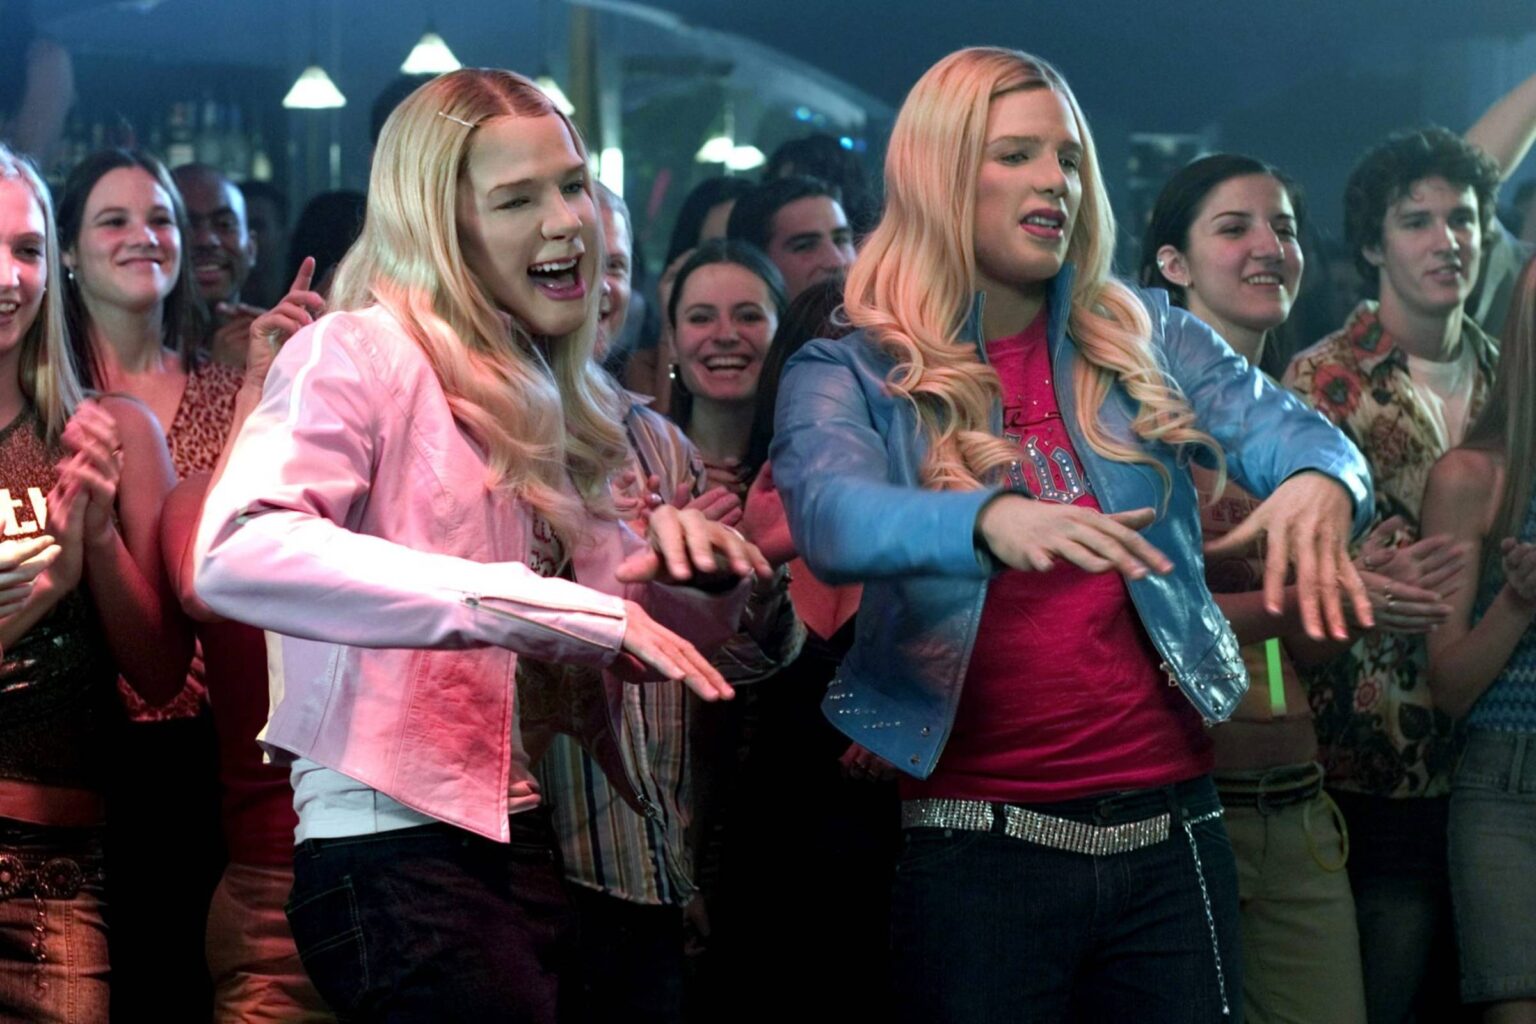 Sequel rumors have been floating around about 'White Chicks' for years now. Here’s everything to know about a possible 'White Chicks 2'.